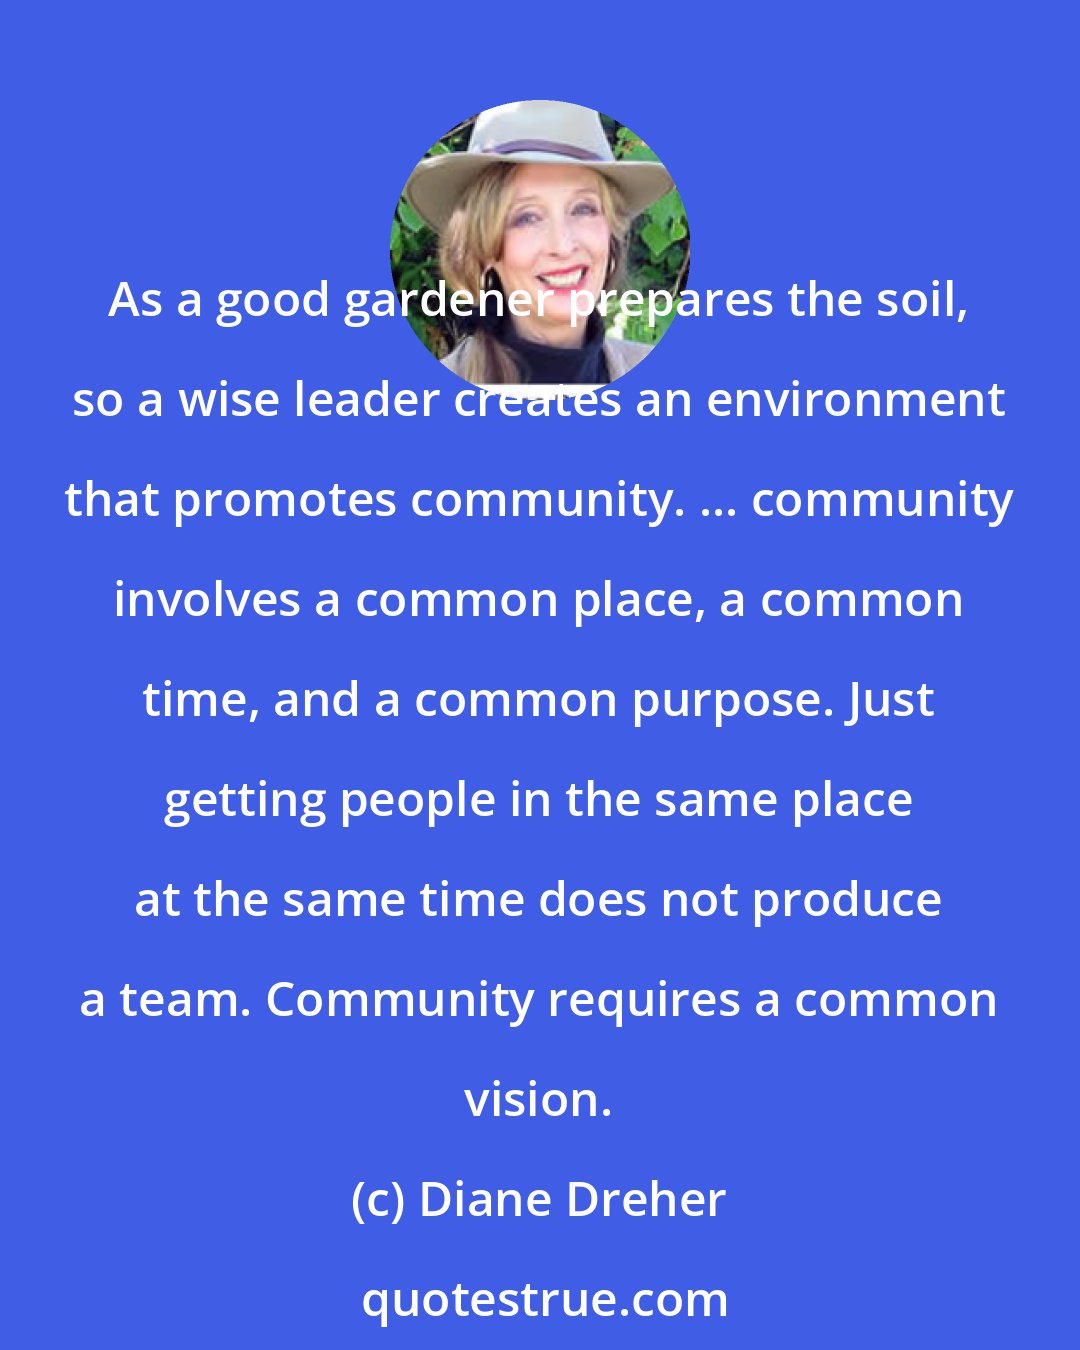 Diane Dreher: As a good gardener prepares the soil, so a wise leader creates an environment that promotes community. ... community involves a common place, a common time, and a common purpose. Just getting people in the same place at the same time does not produce a team. Community requires a common vision.